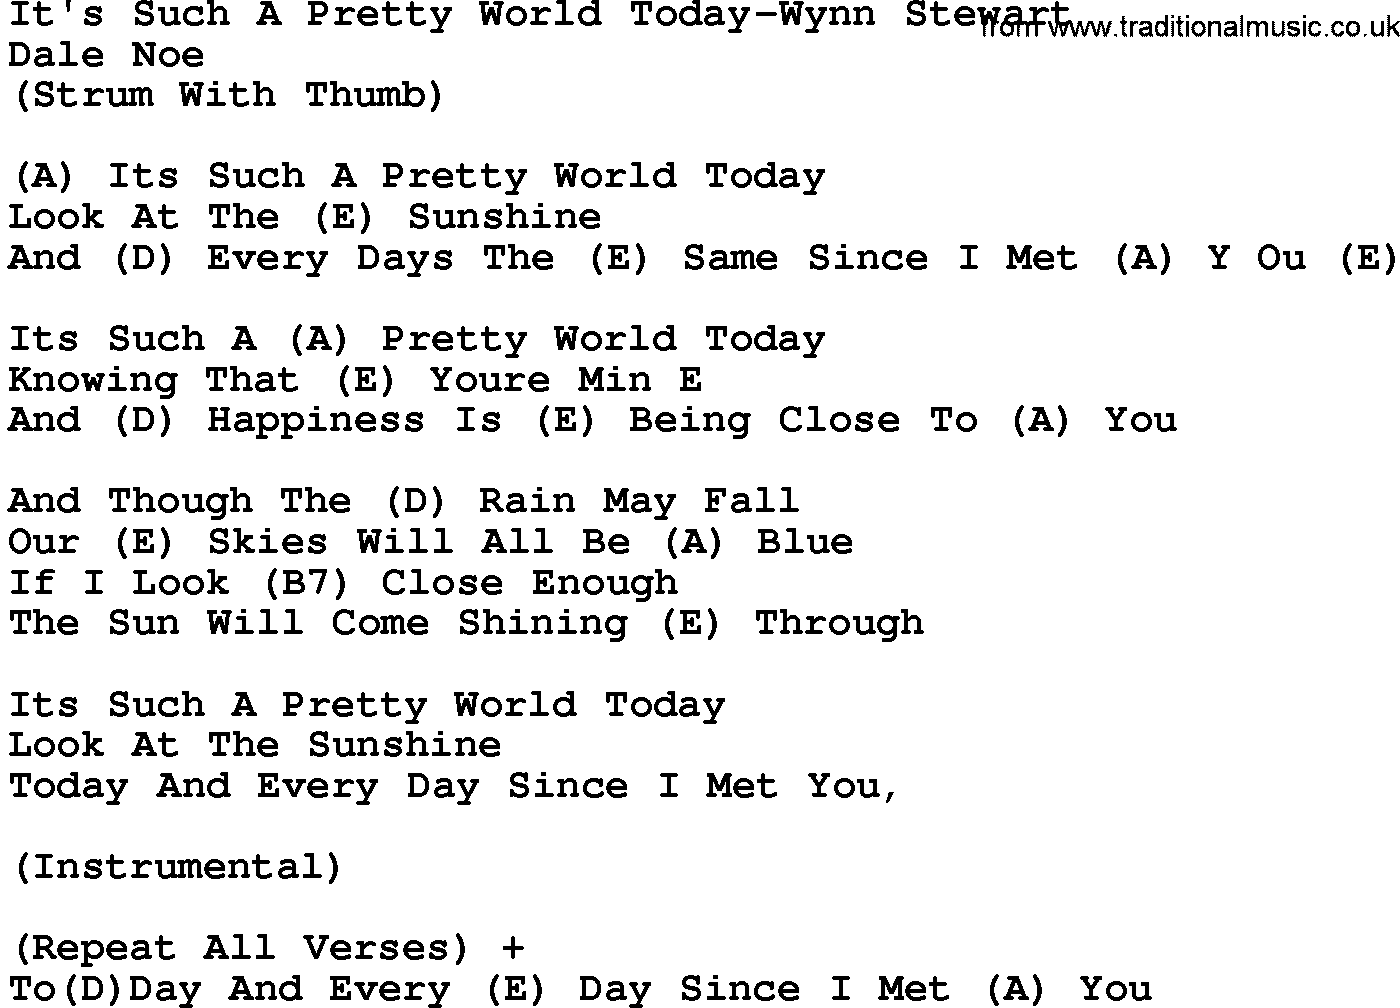 Country music song: It's Such A Pretty World Today-Wynn Stewart lyrics and chords